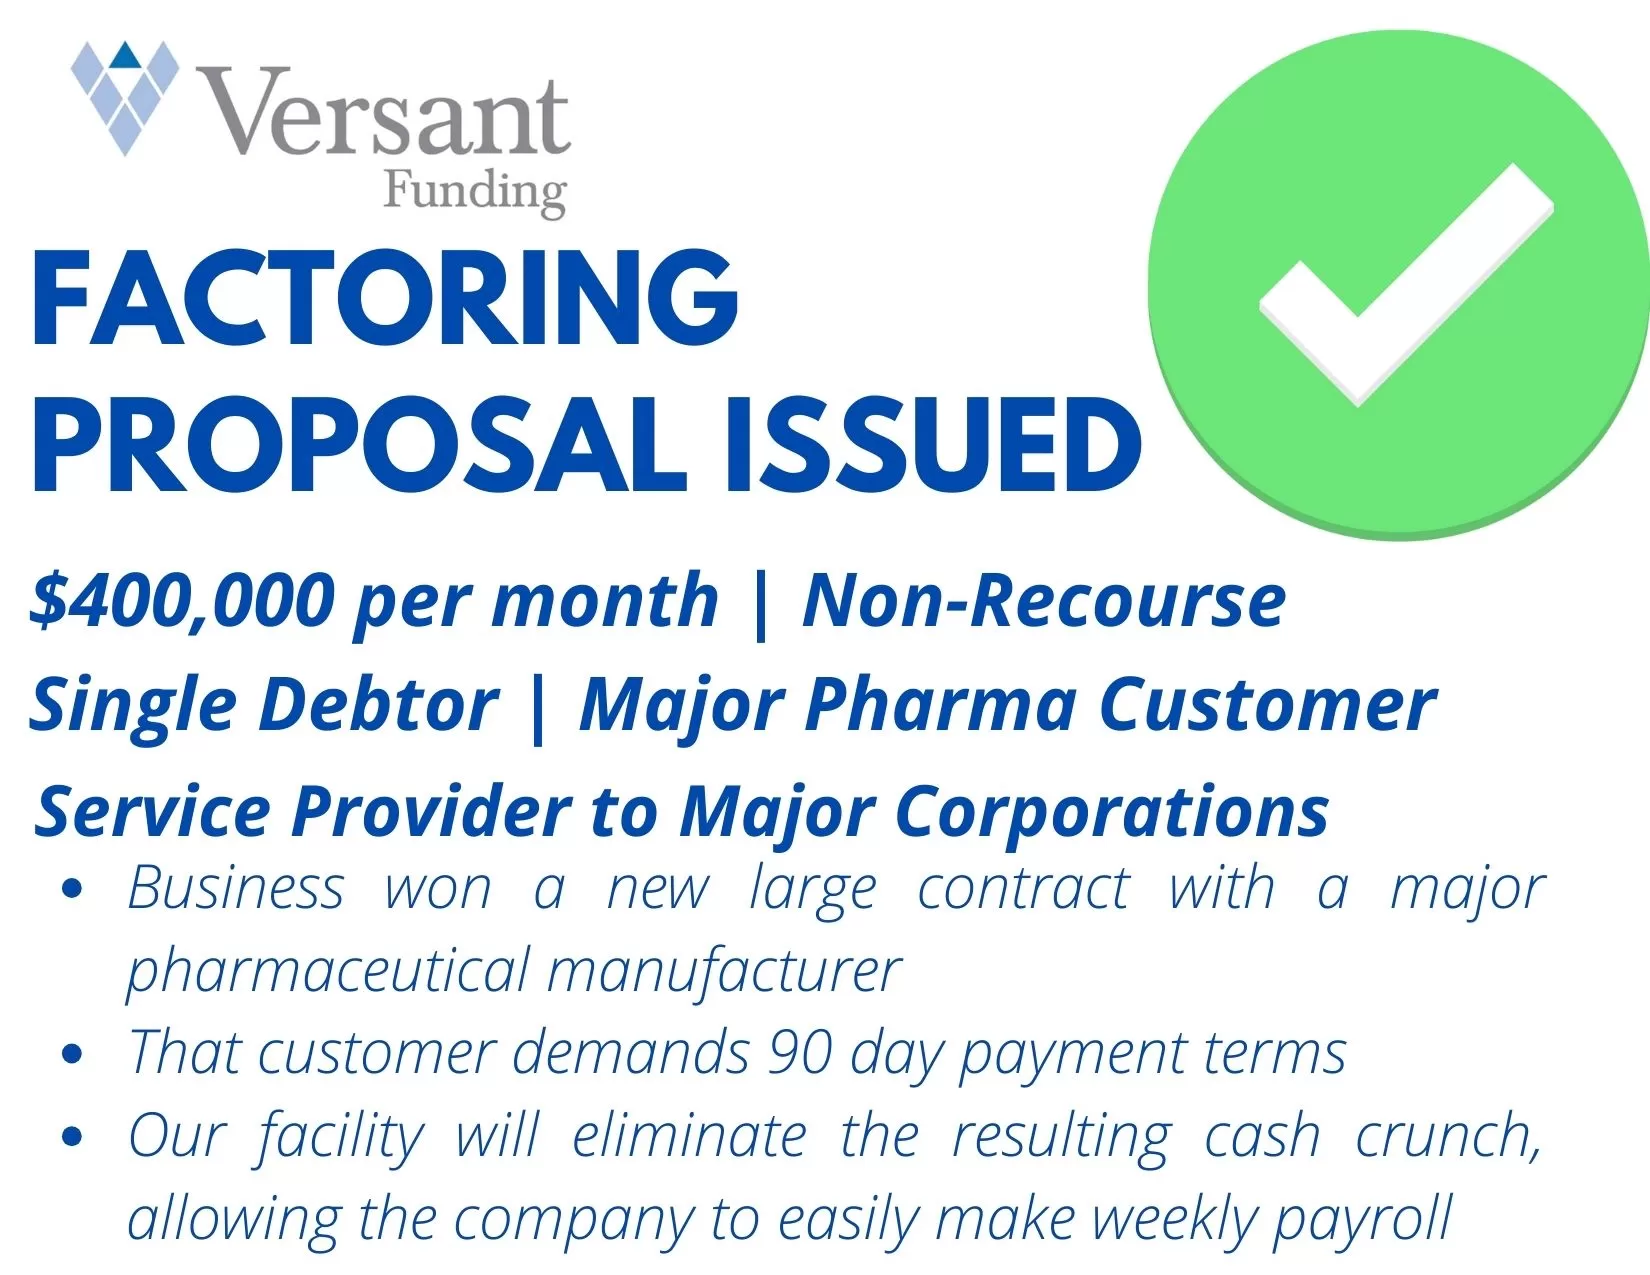 Factoring Proposal Issued - $400,000 - Service Provider